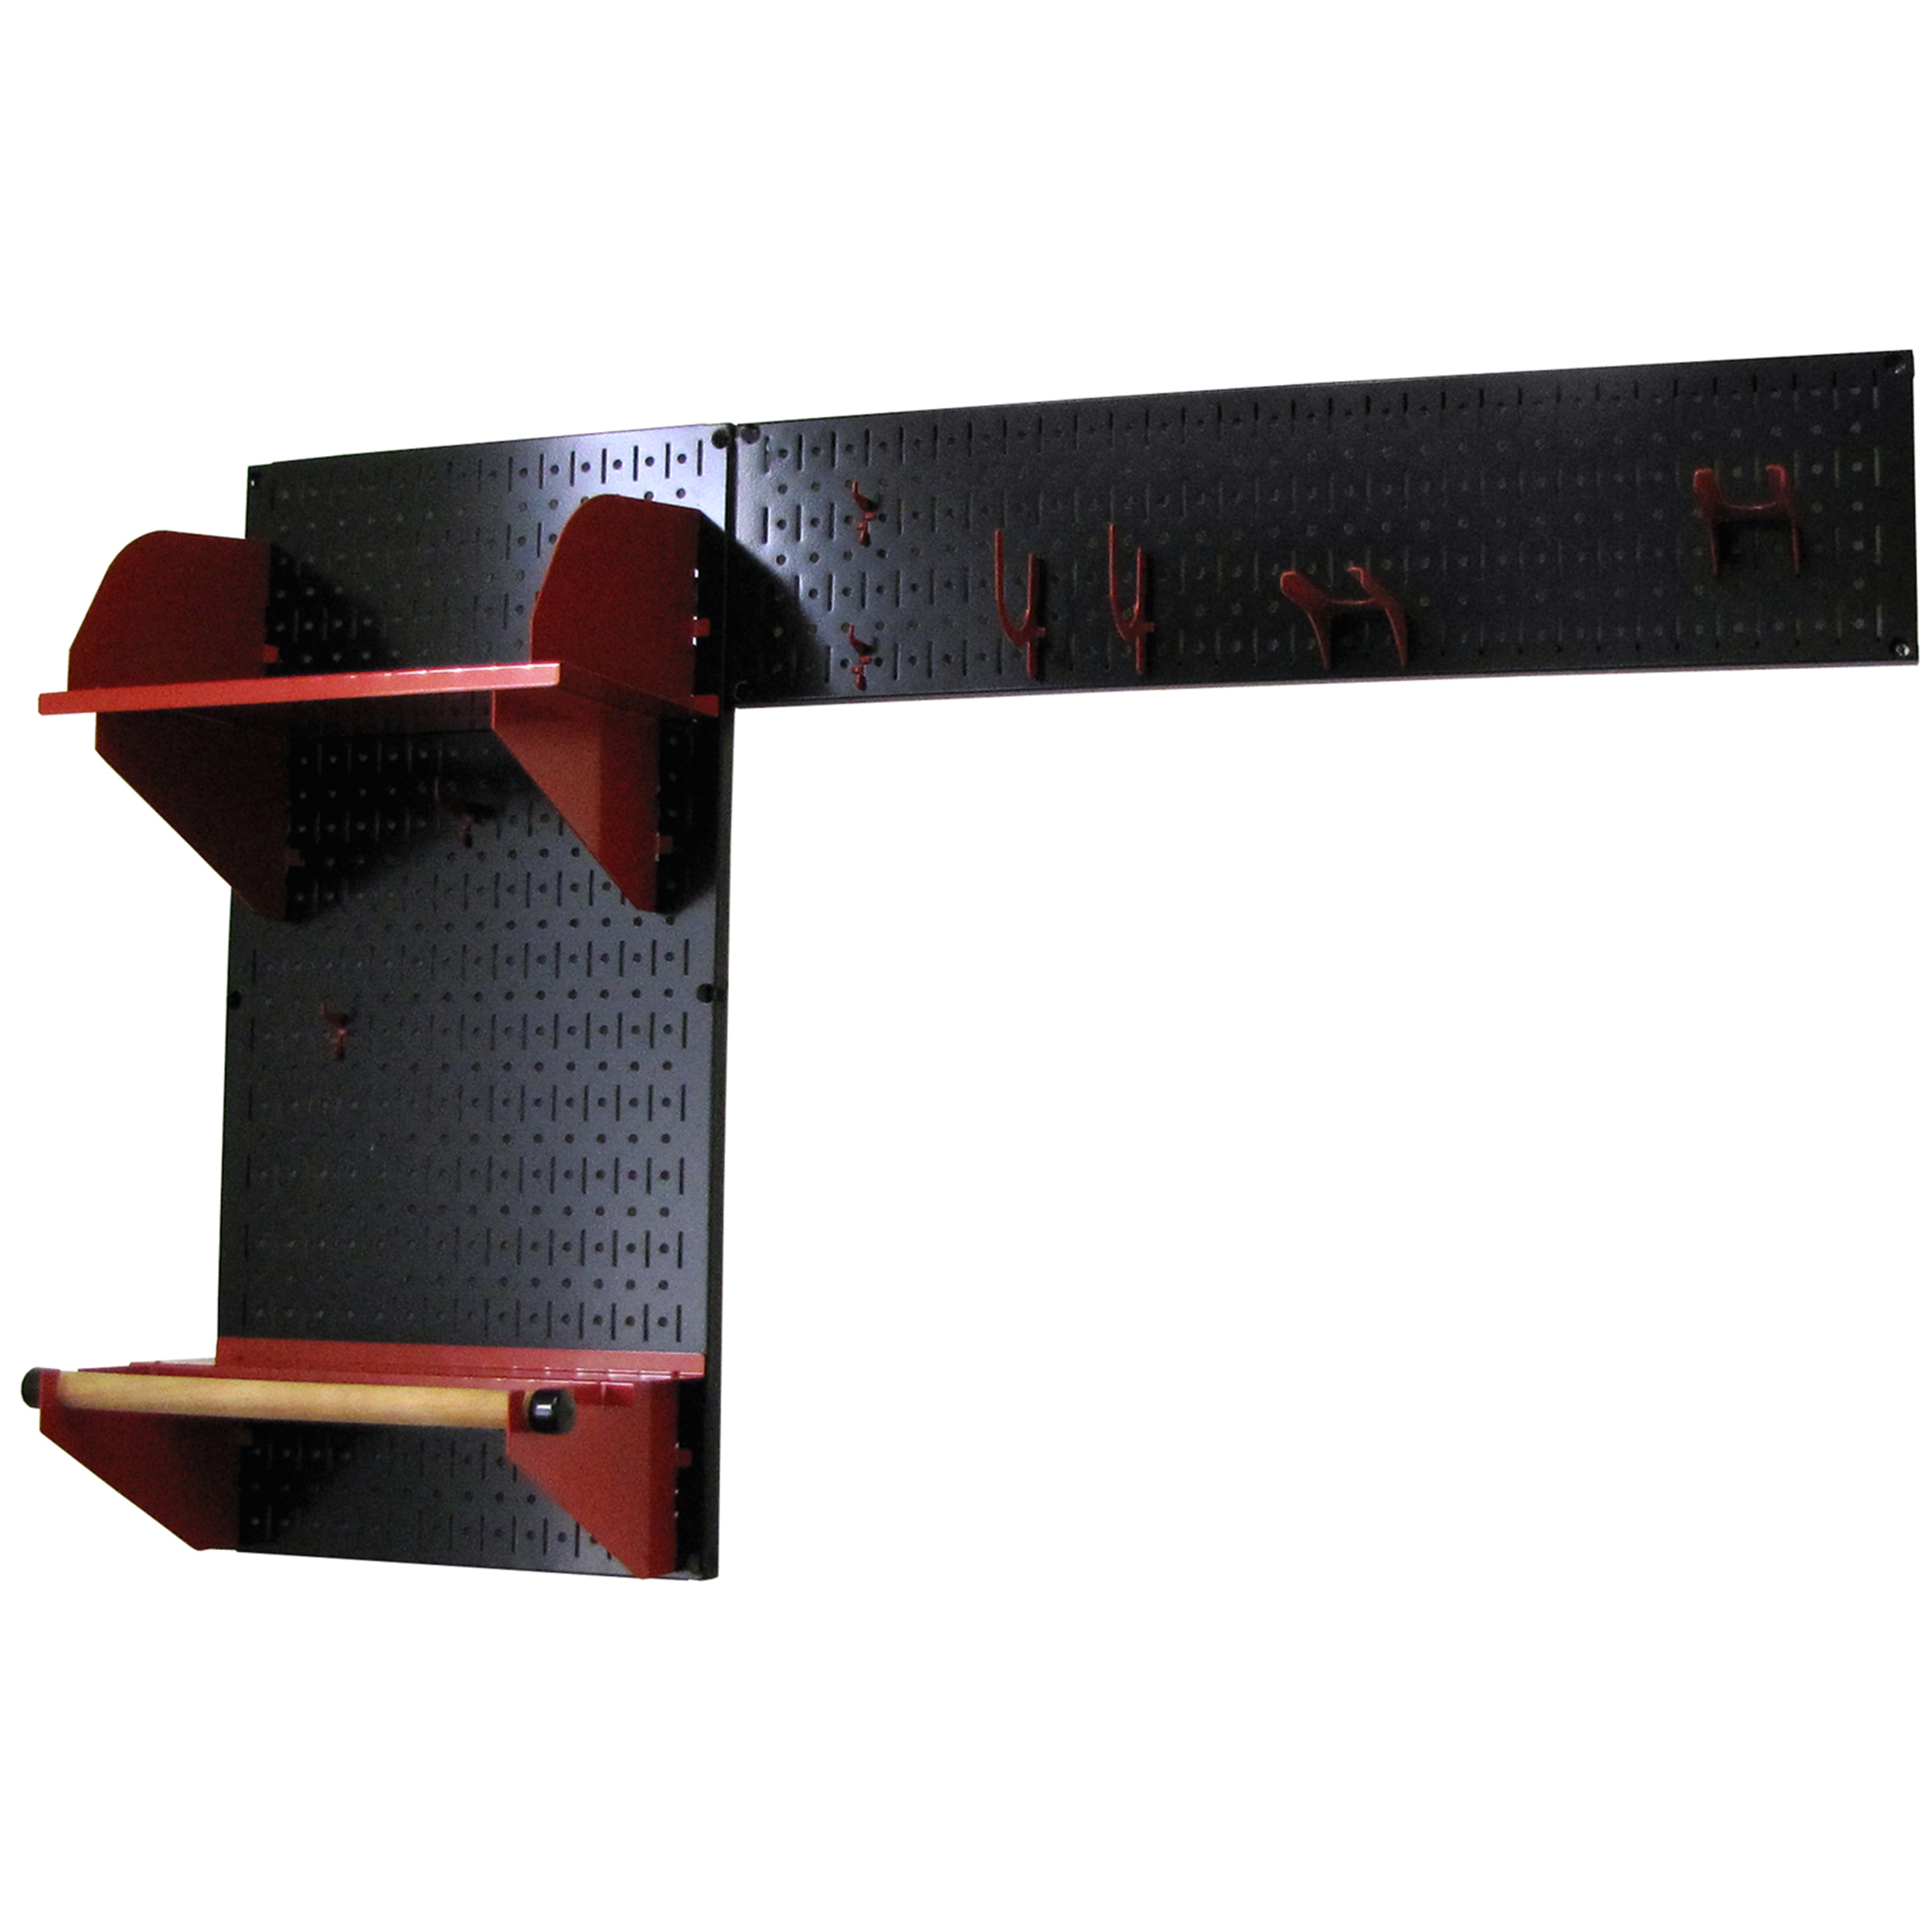 Pegboard Garden Tool Board Organizer With Black Pegboard And Red Accessories